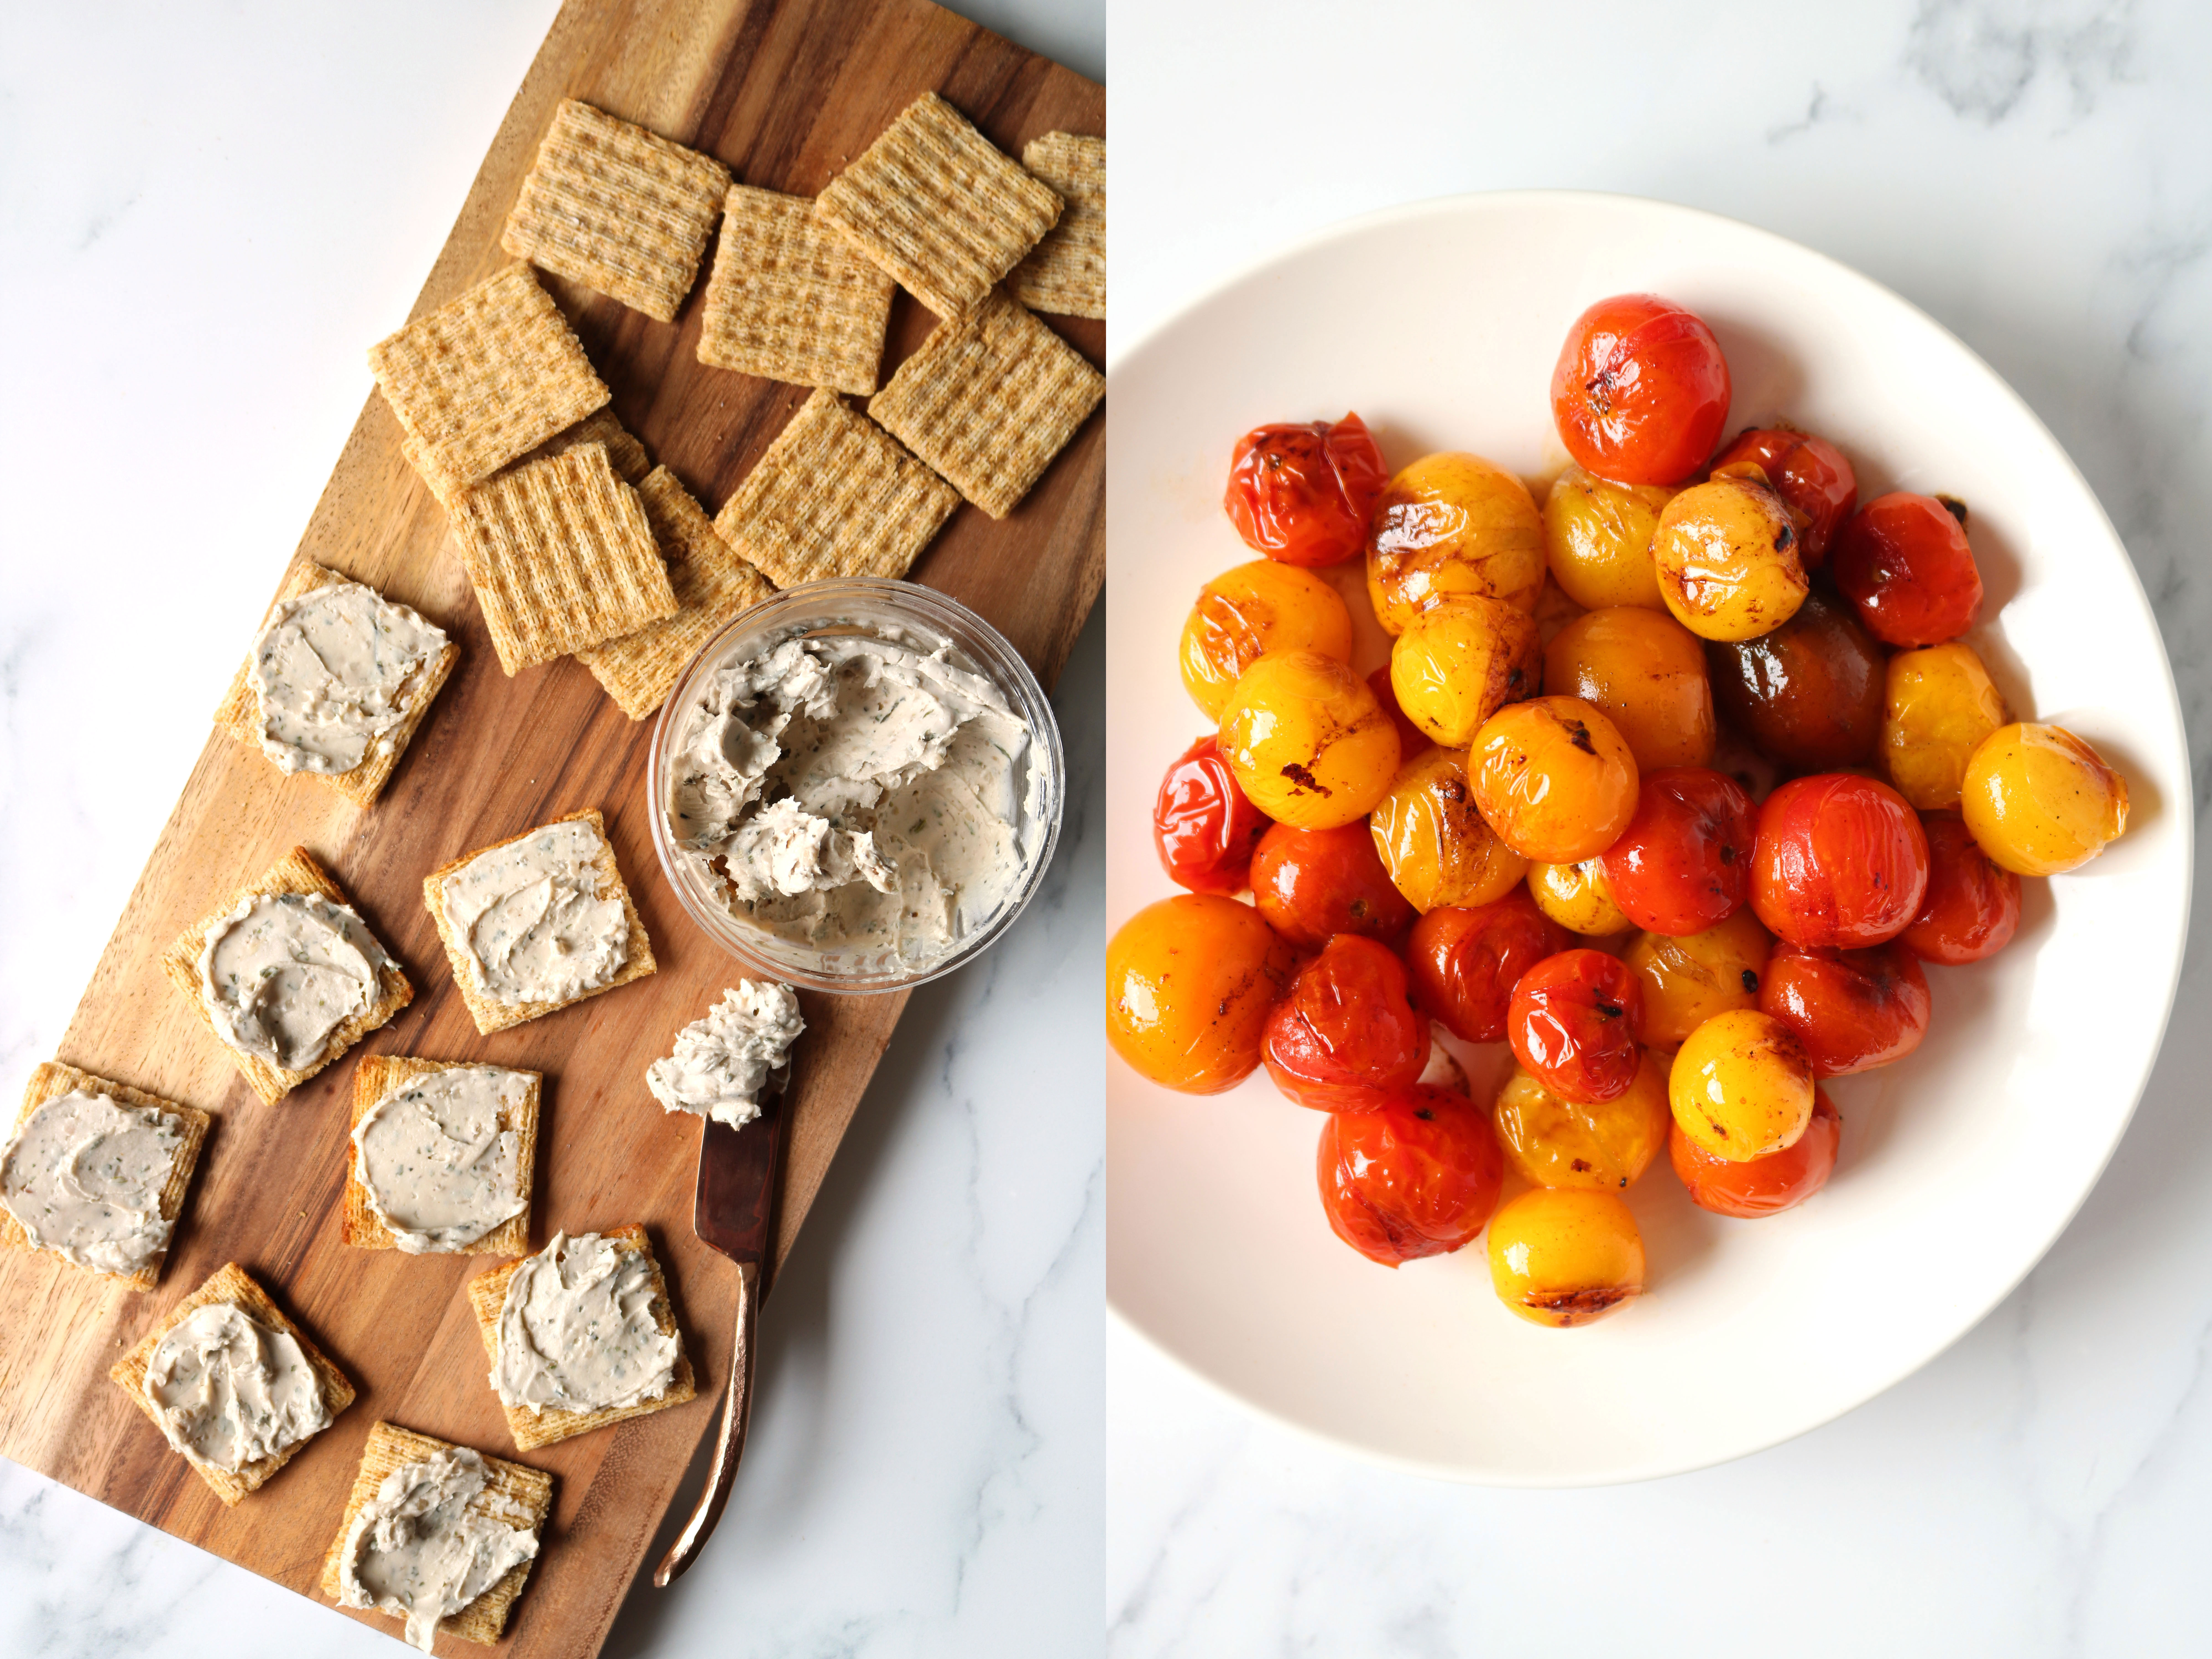 Triscuits next to blistered tomatoes in a bowl and cashew cheese spread